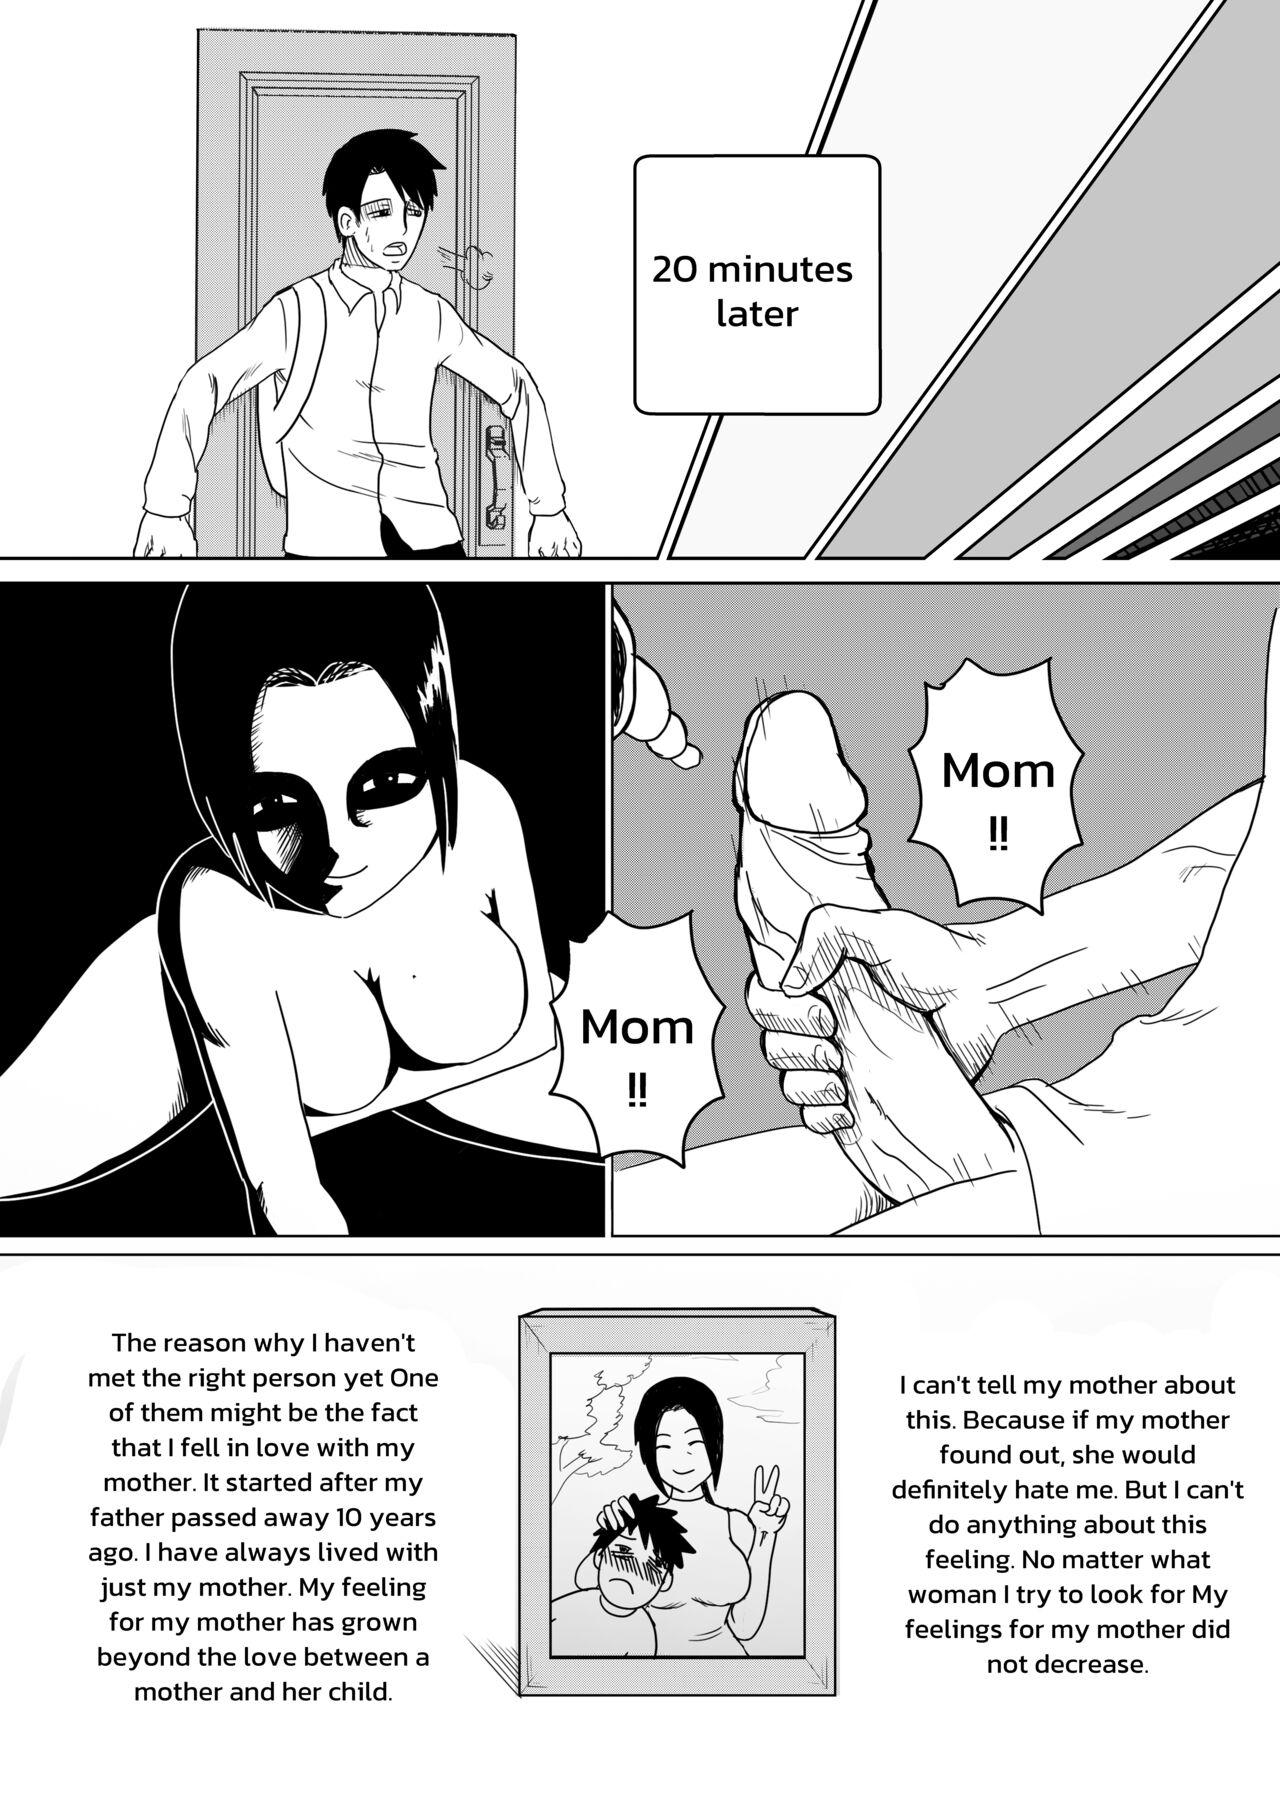 Monster Dick I'm in love with my mother - Prologue - Original Exposed - Page 5